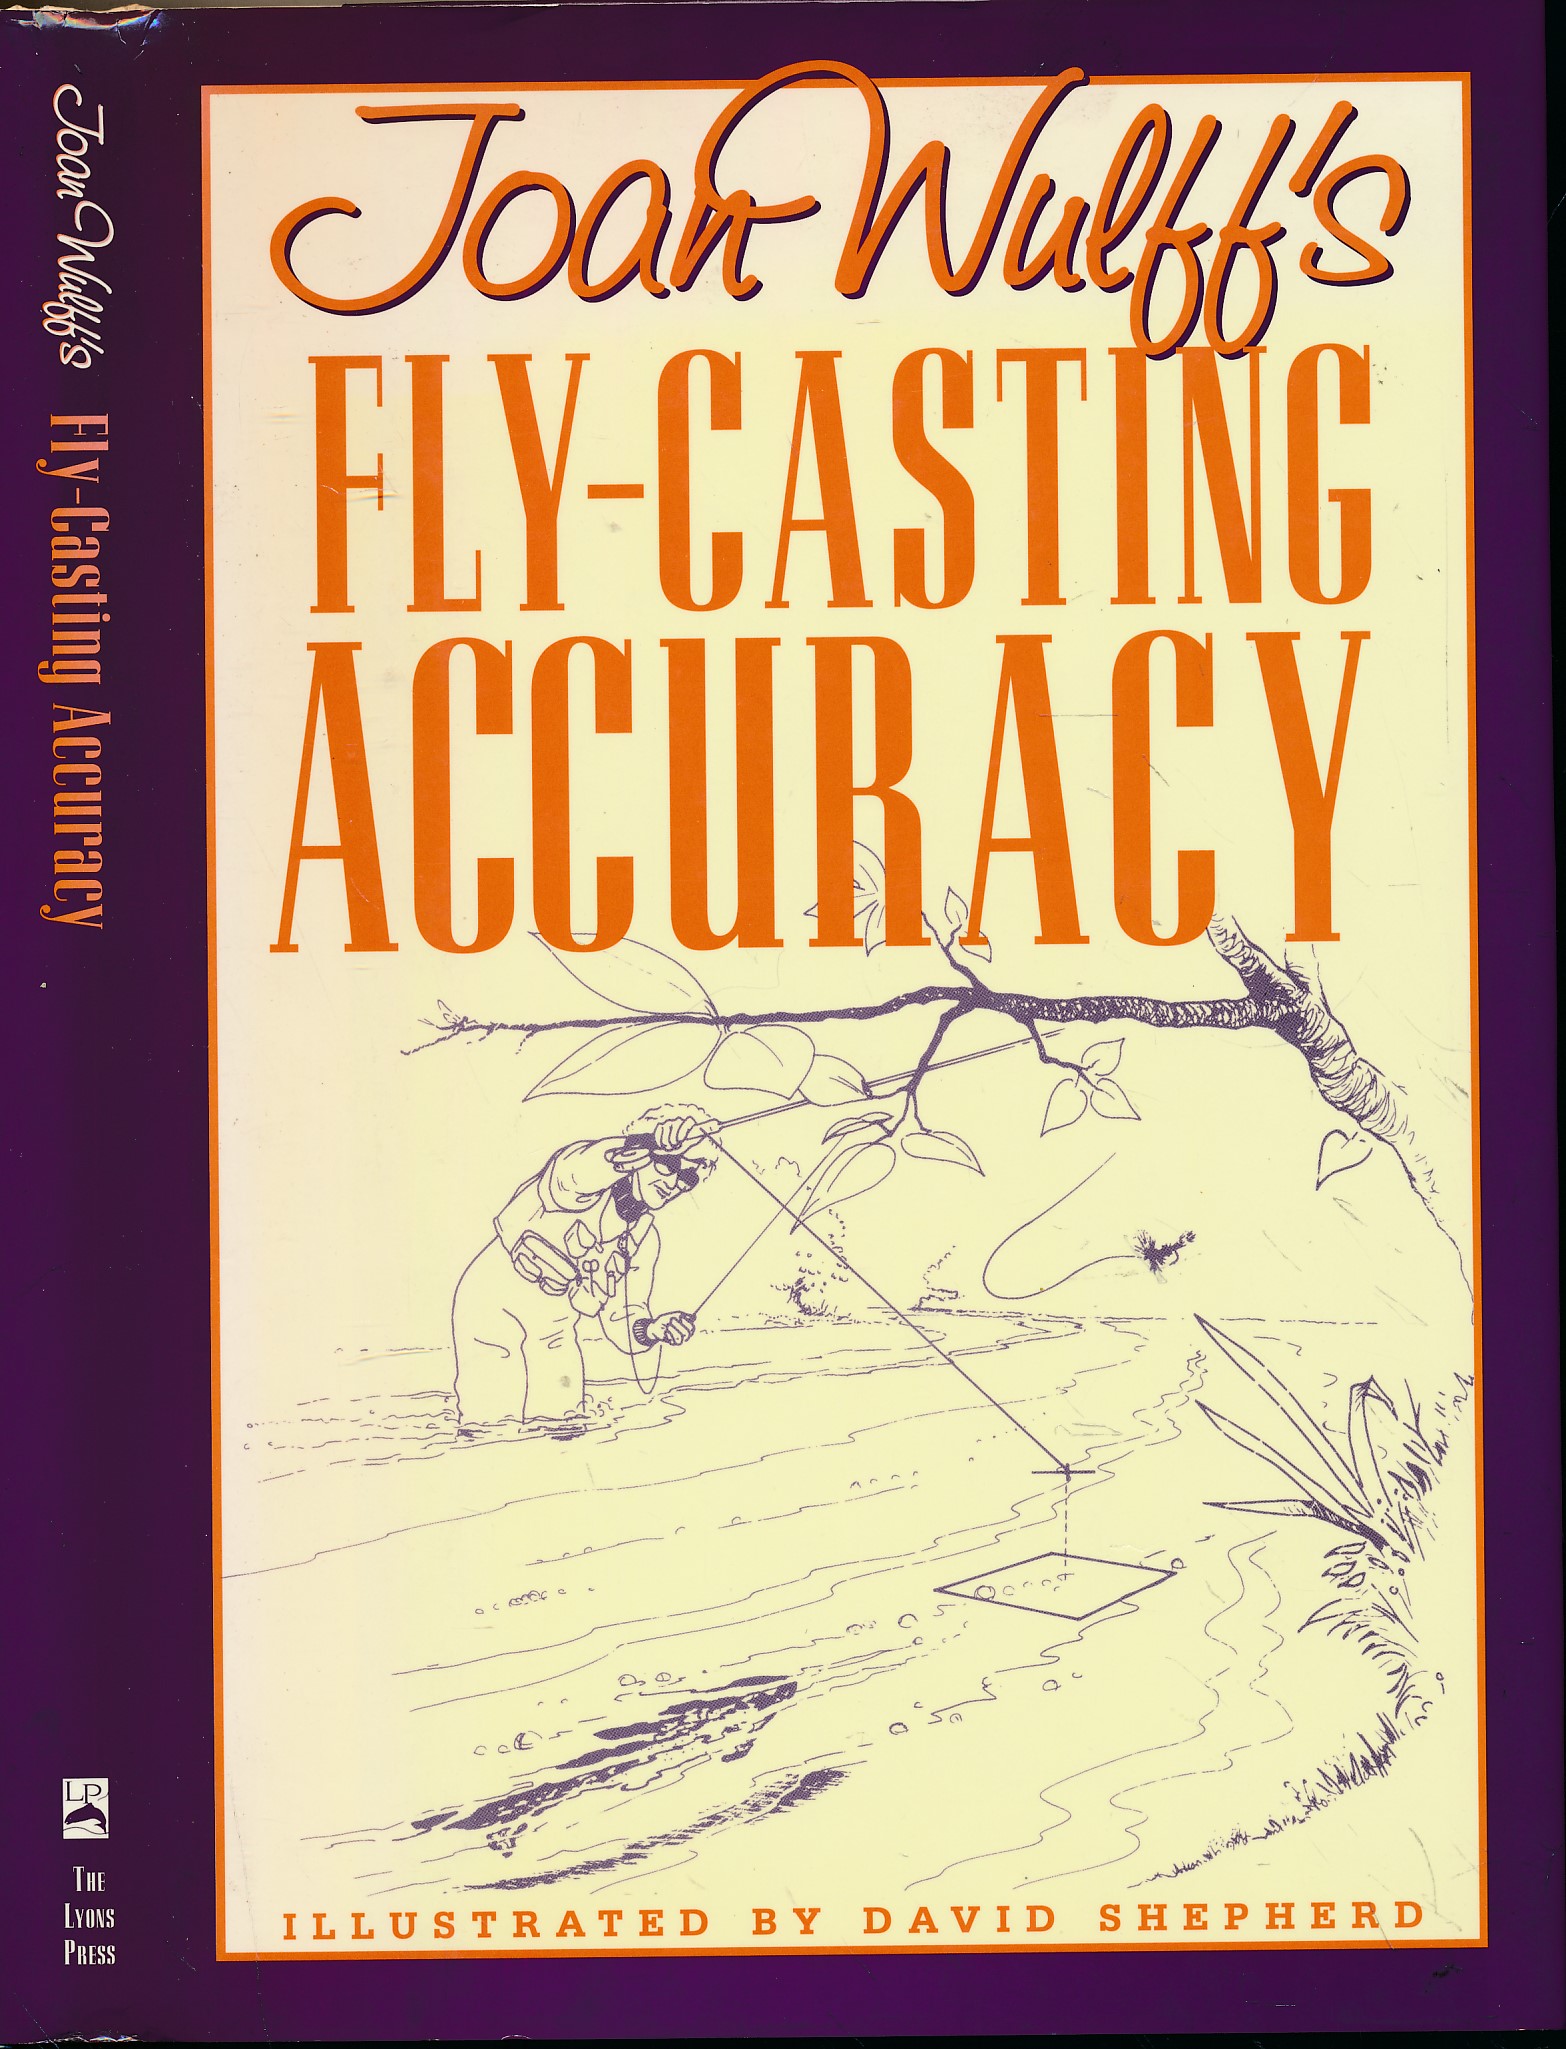 Fly-Casting Accuracy. Signed Copy.